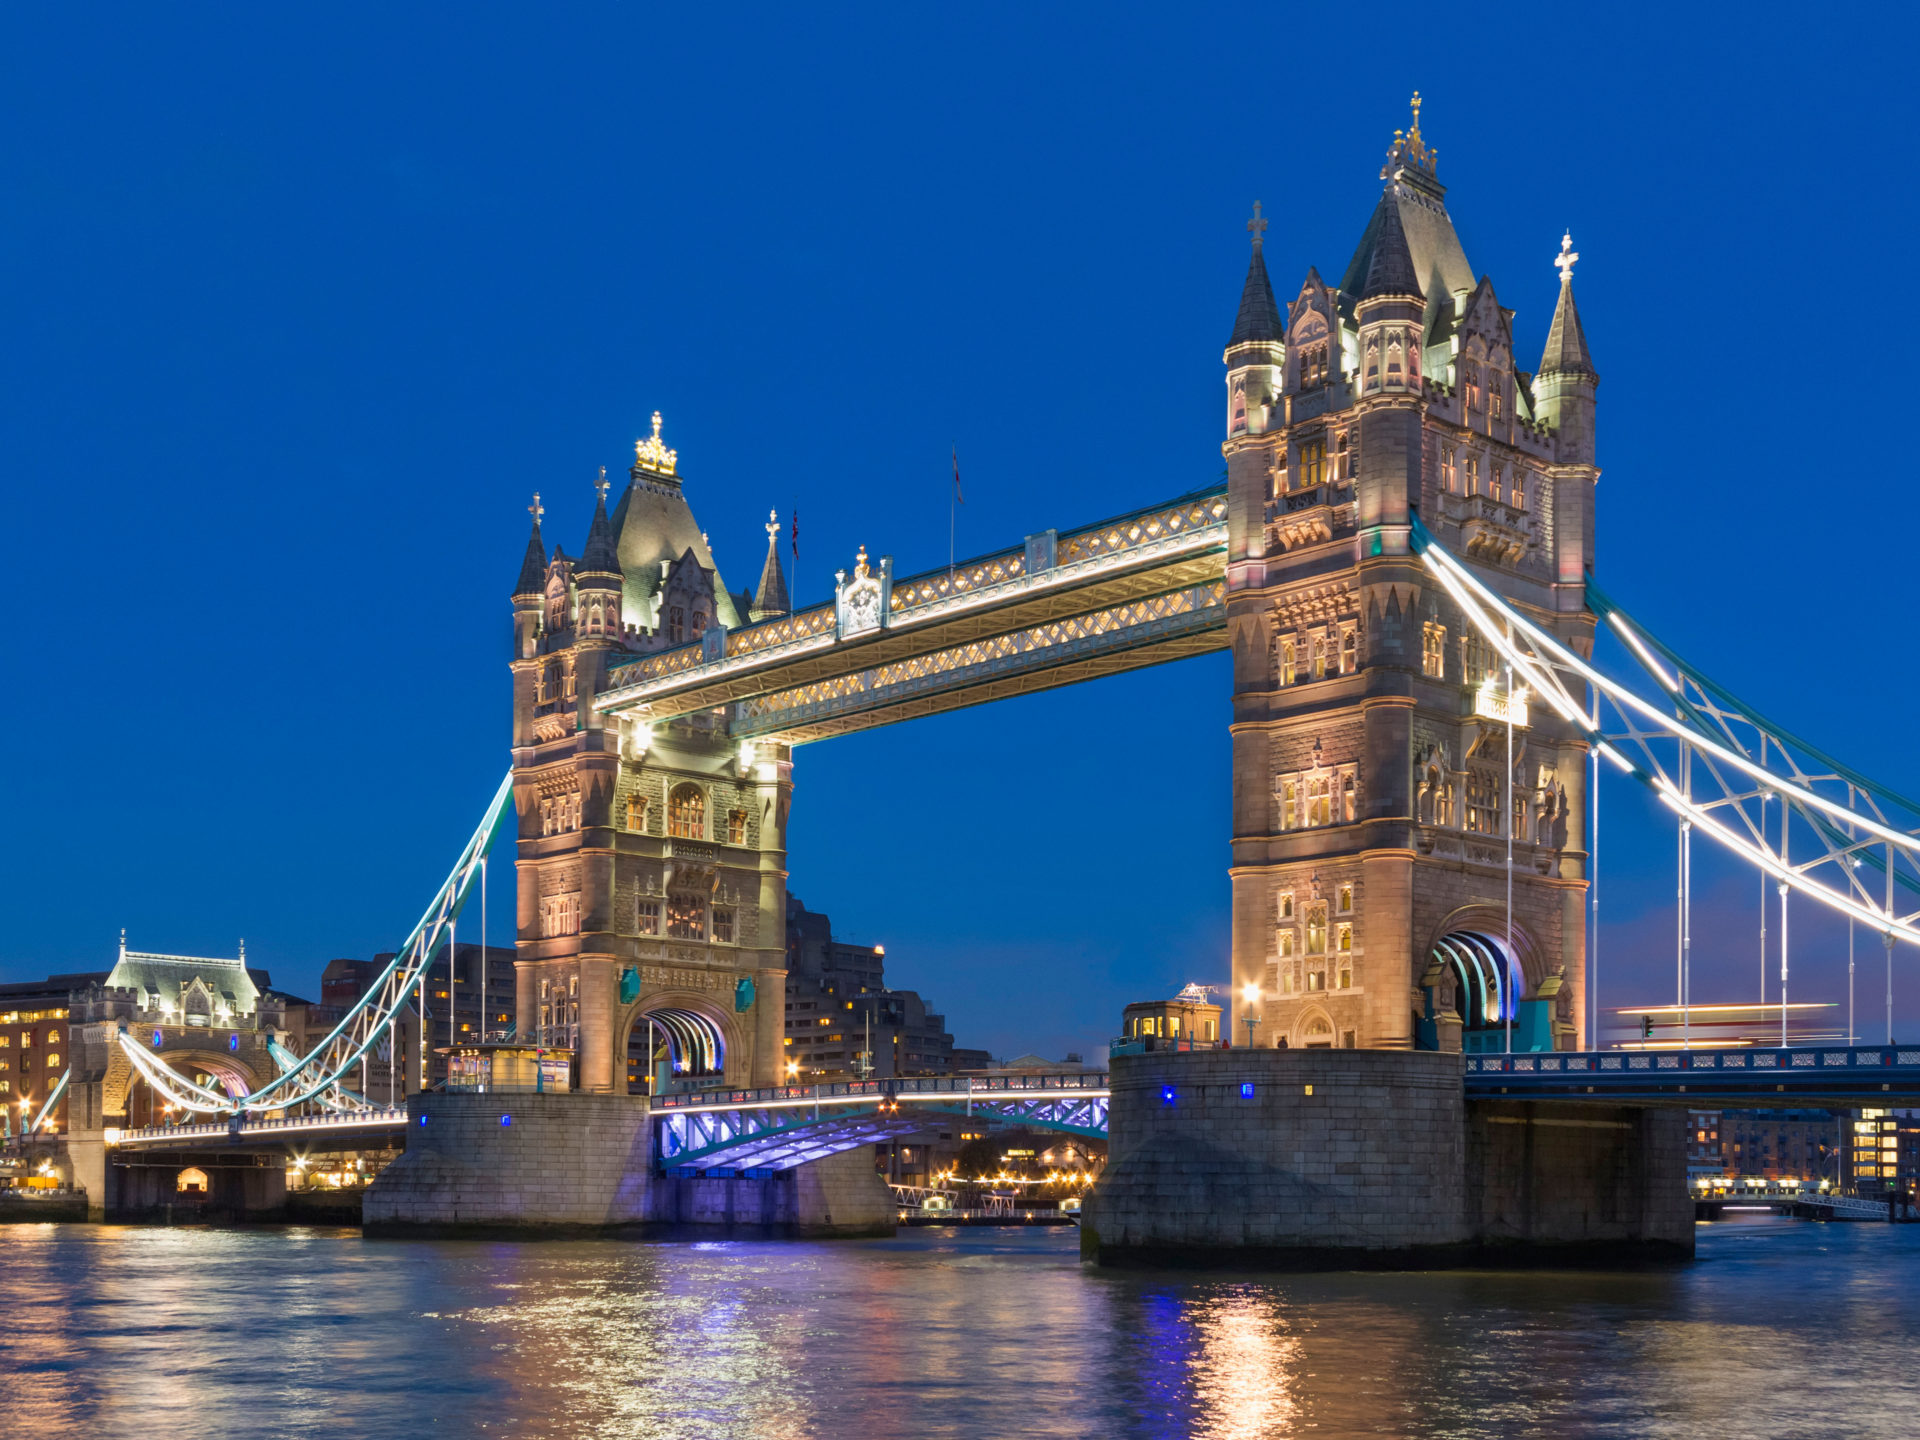 Tower Bridge in London, England is seen at night in February 2014